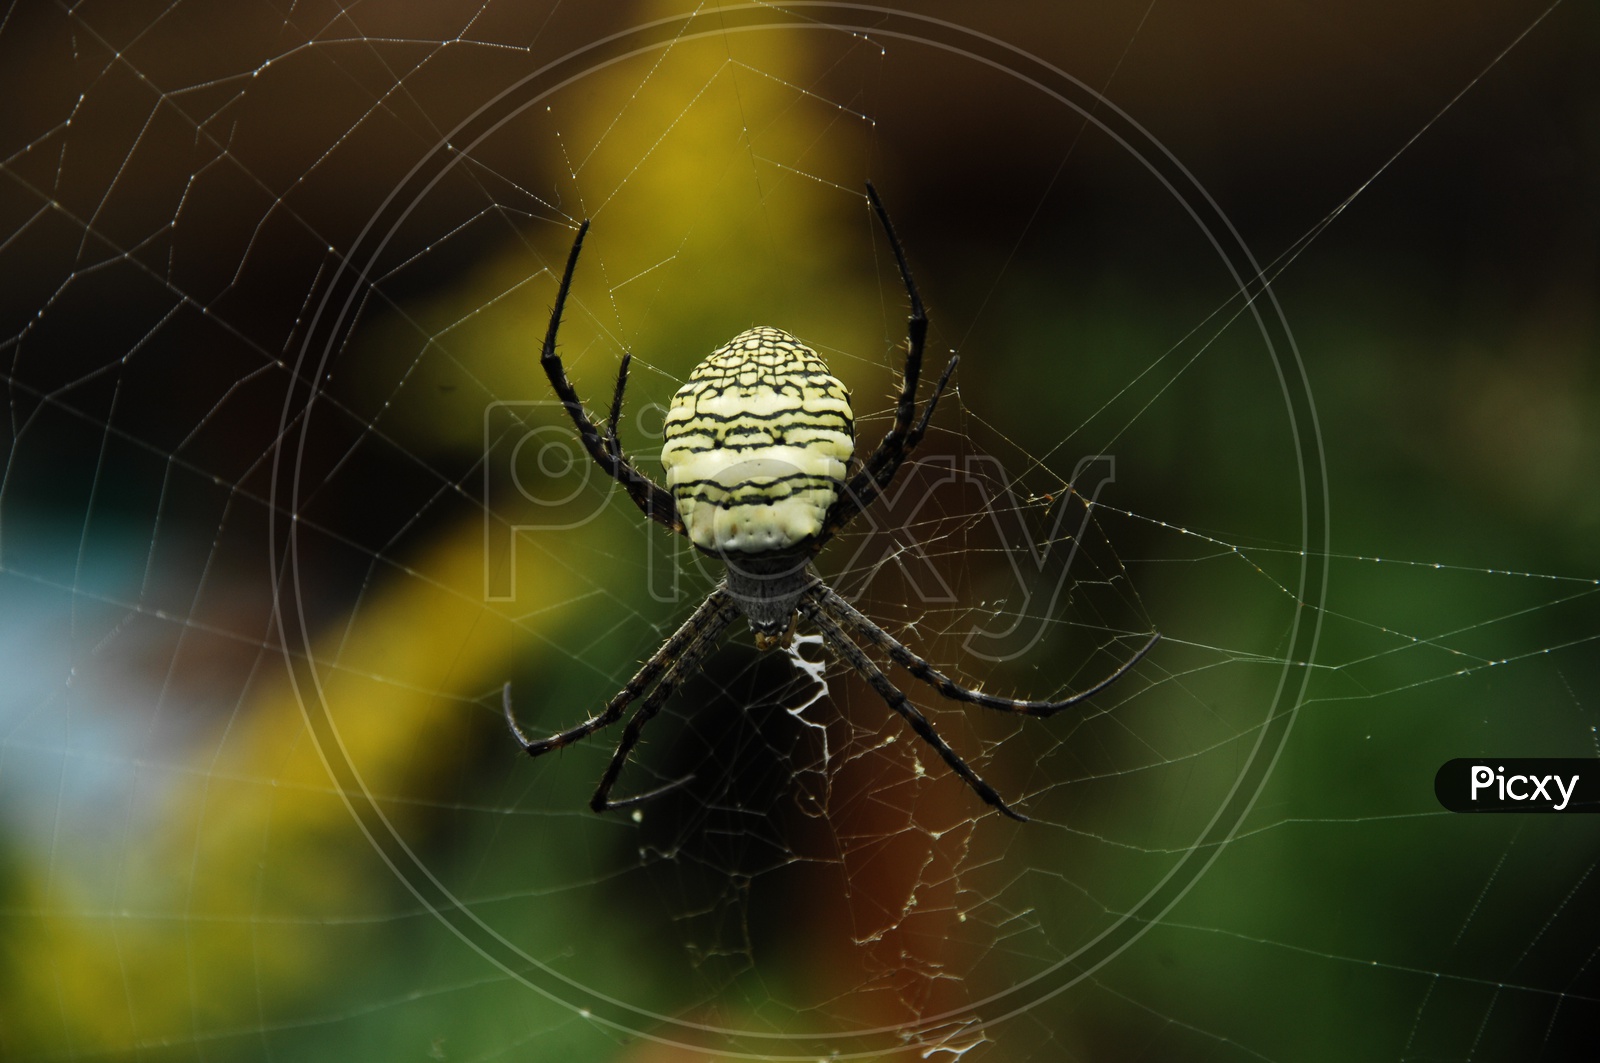 A Spider weaving a web